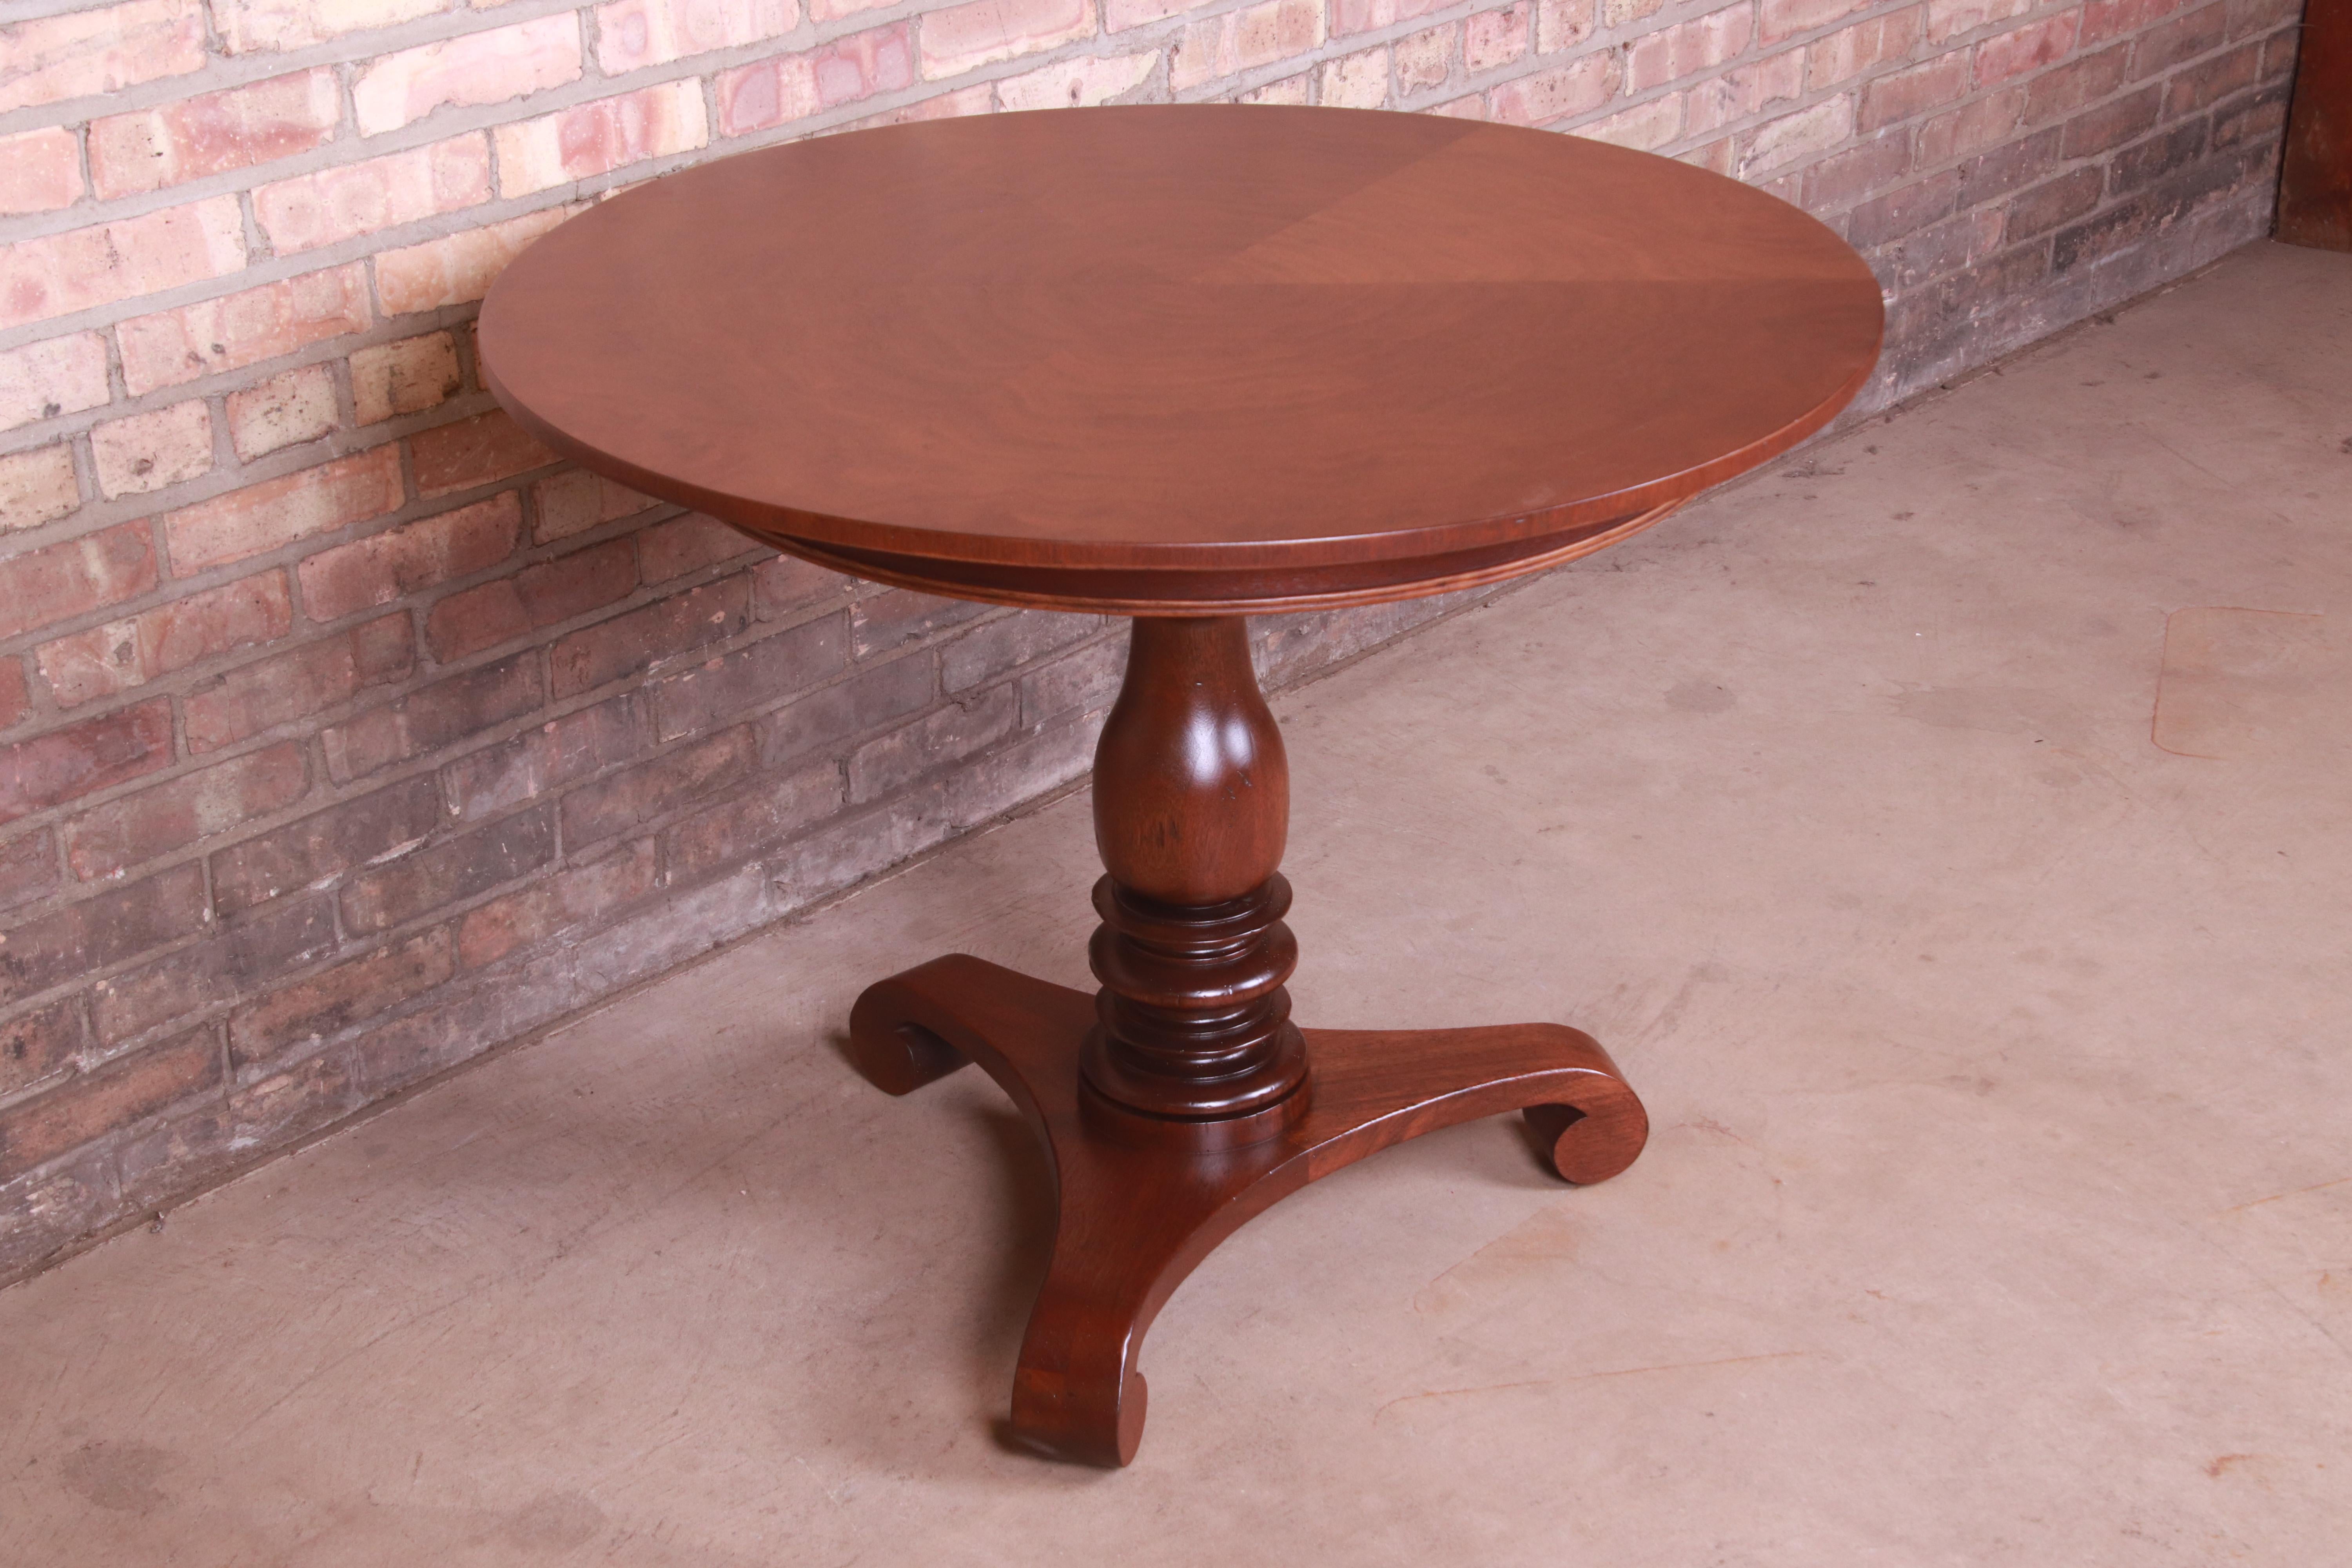 Baker Furniture Empire Mahogany Pedestal Tea Table or Center Table, Refinished 1